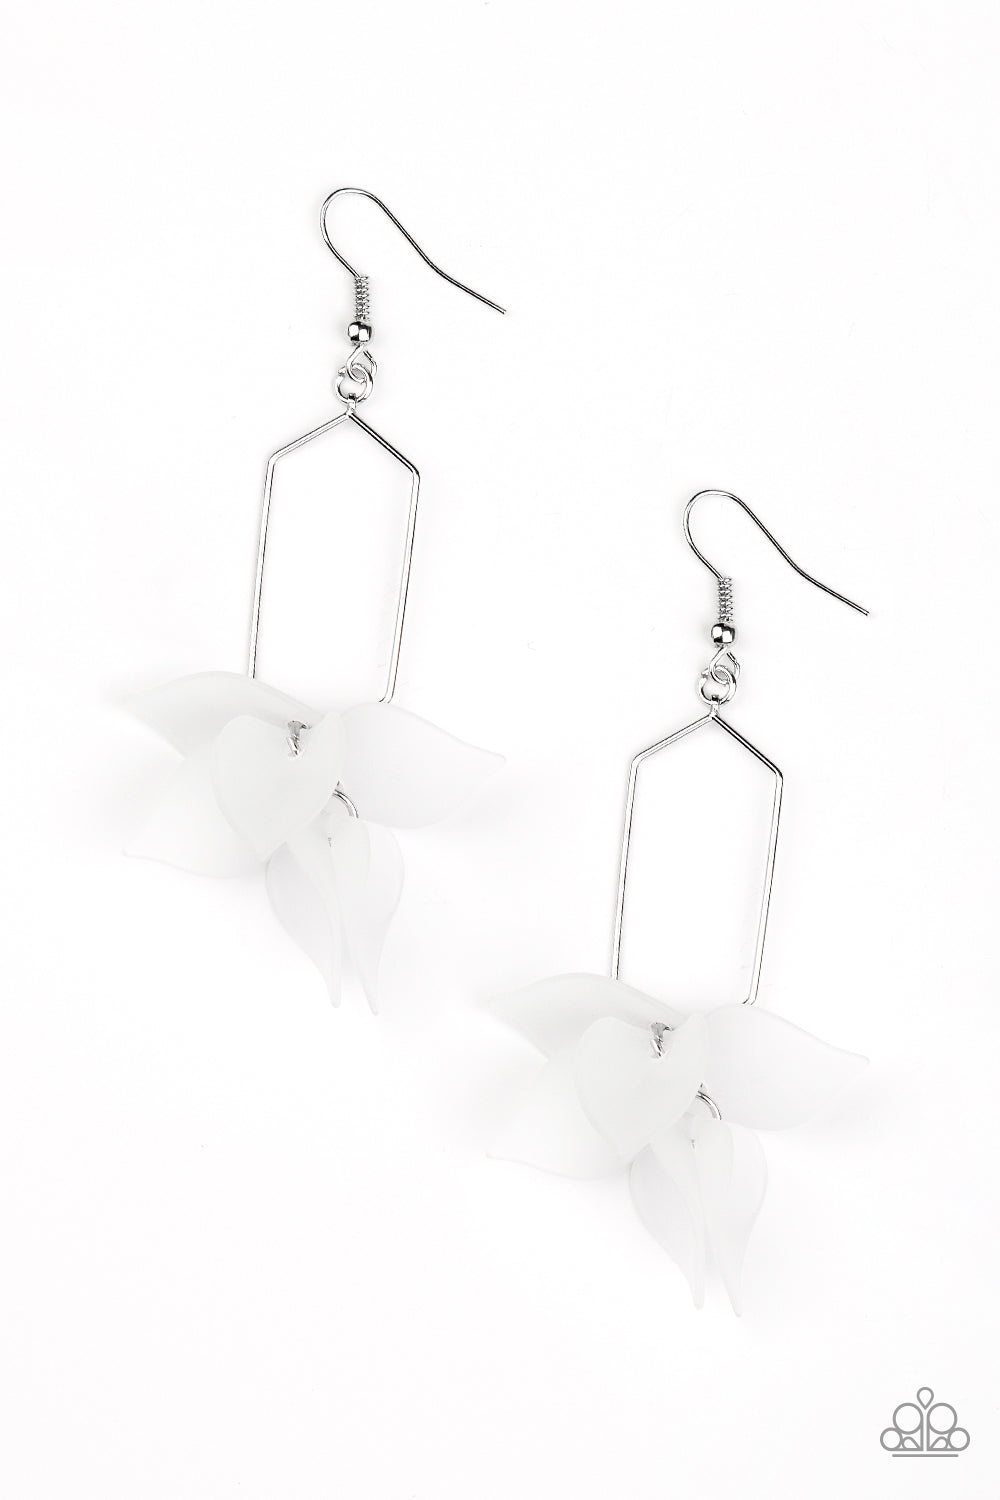 Extra Ethereal - White Earrings - Princess Glam Shop